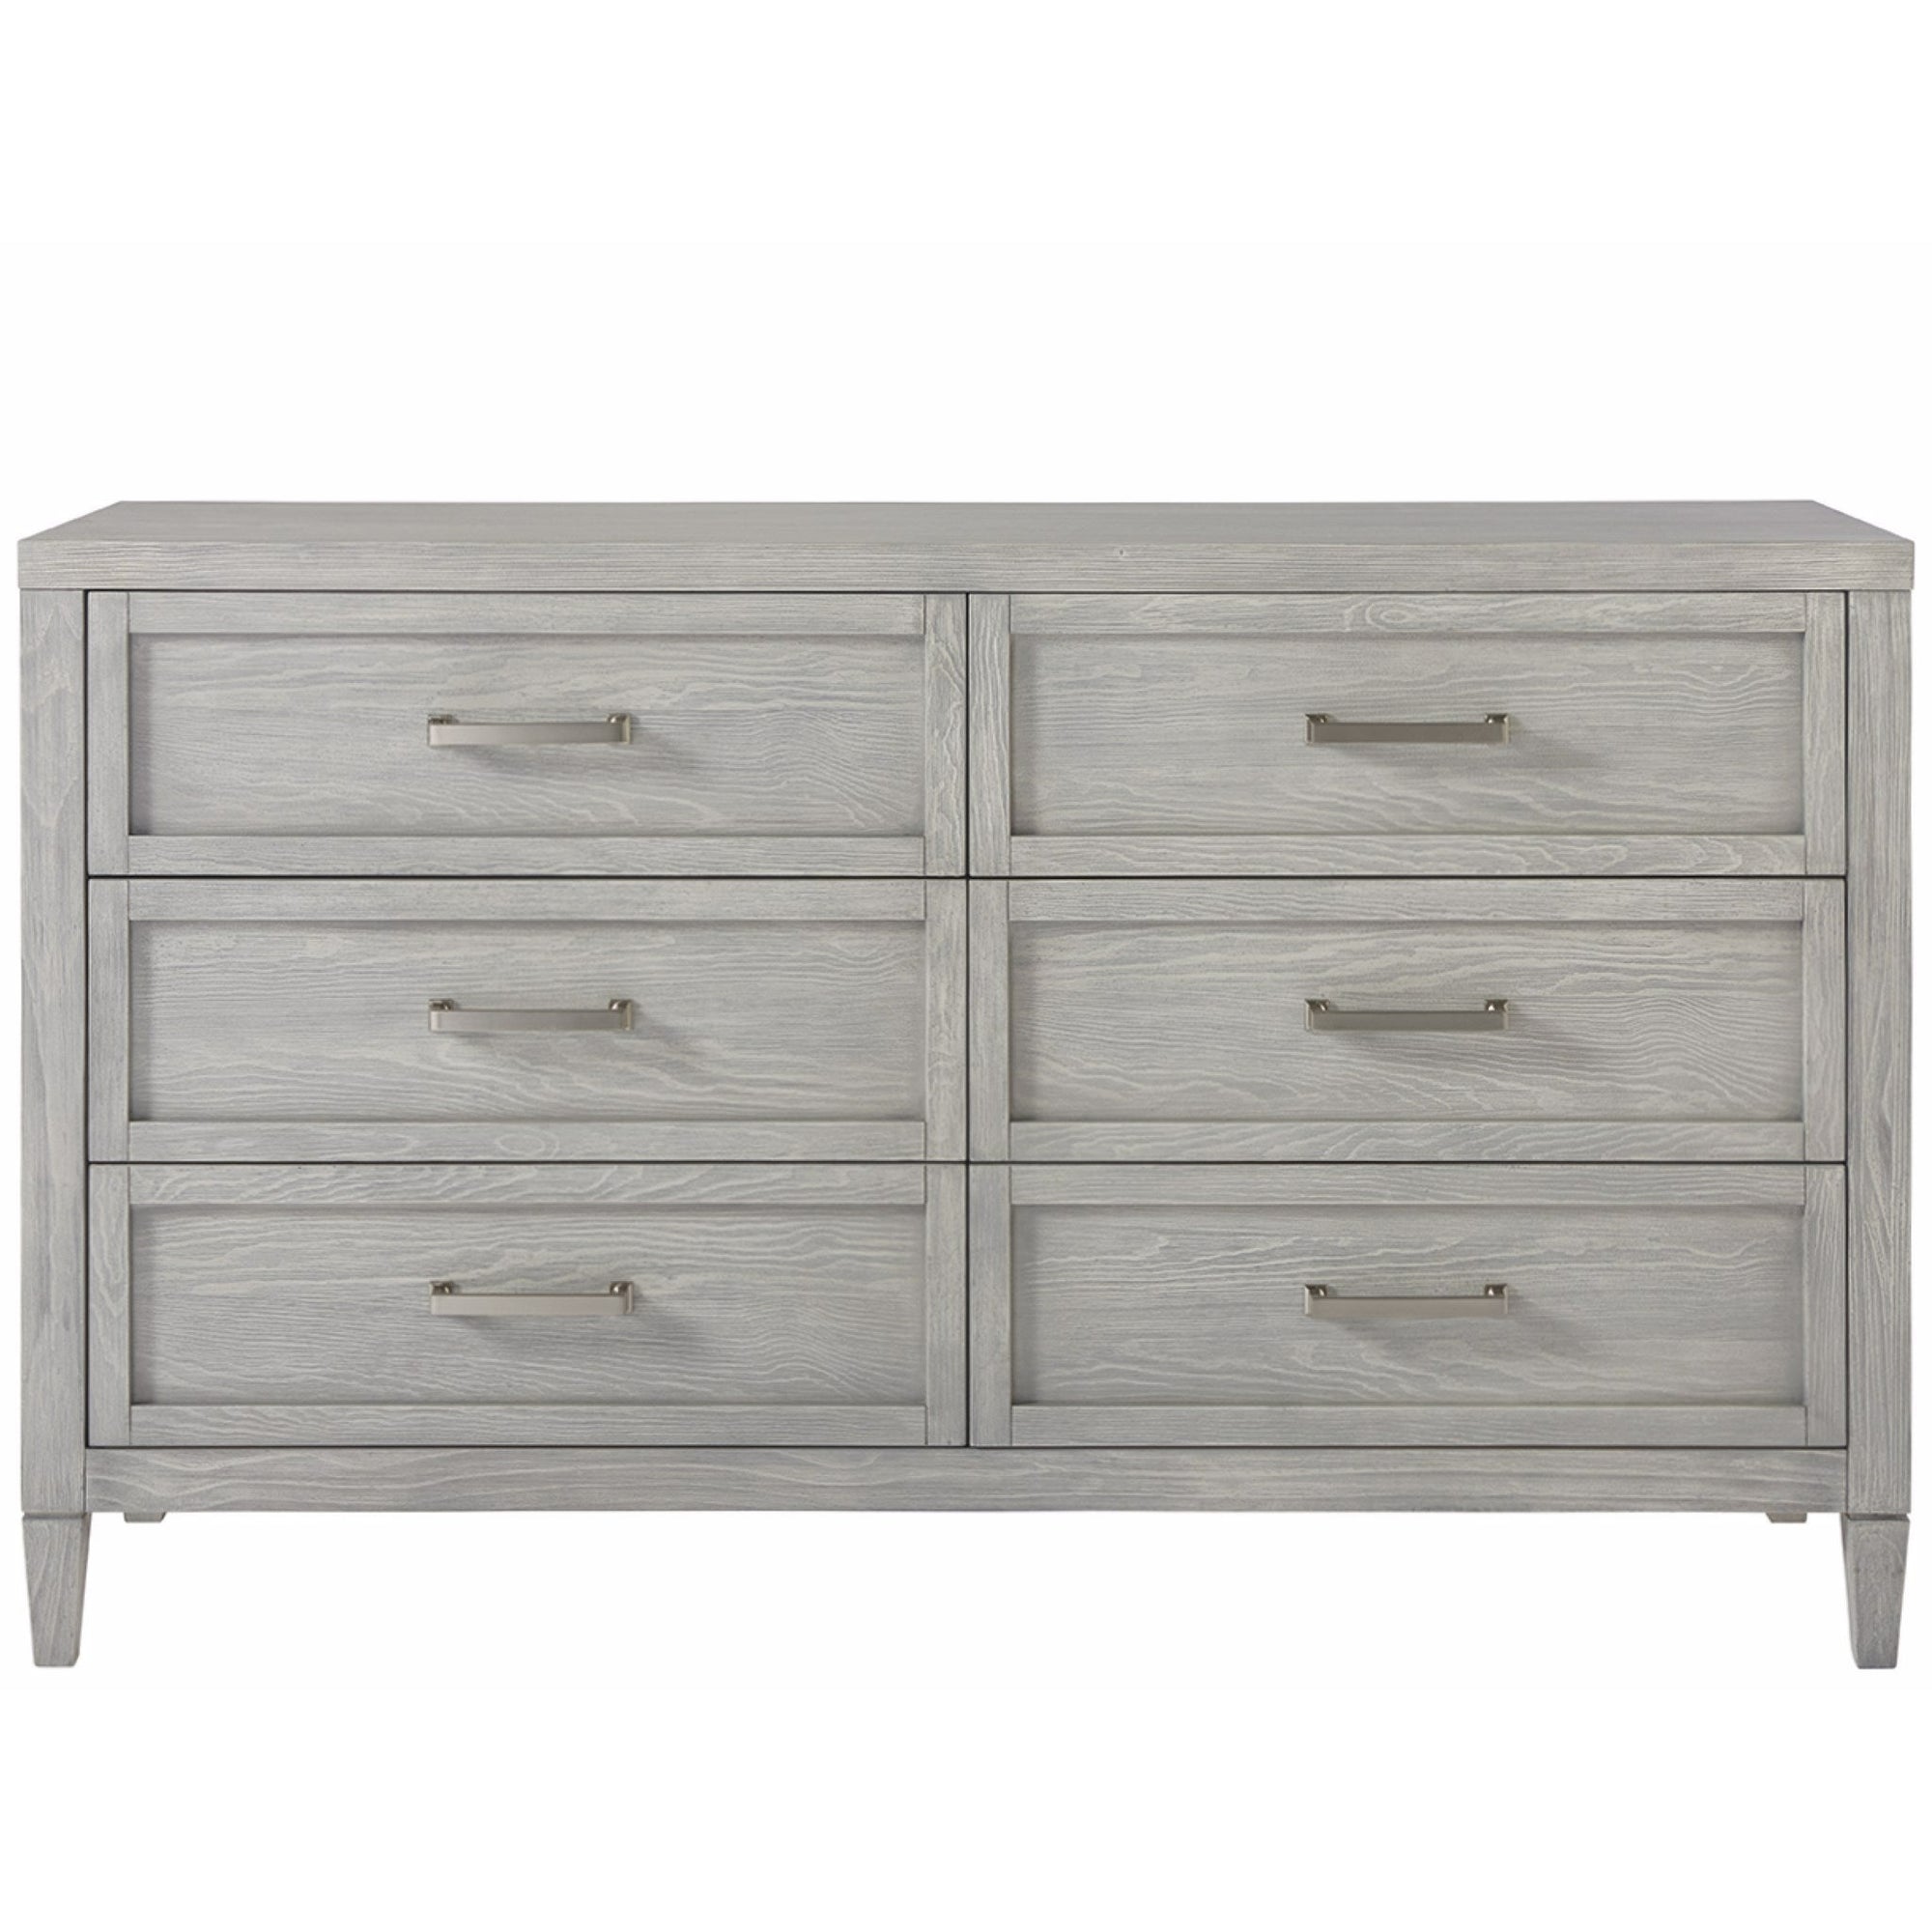 Small Spaces Dresser 60"